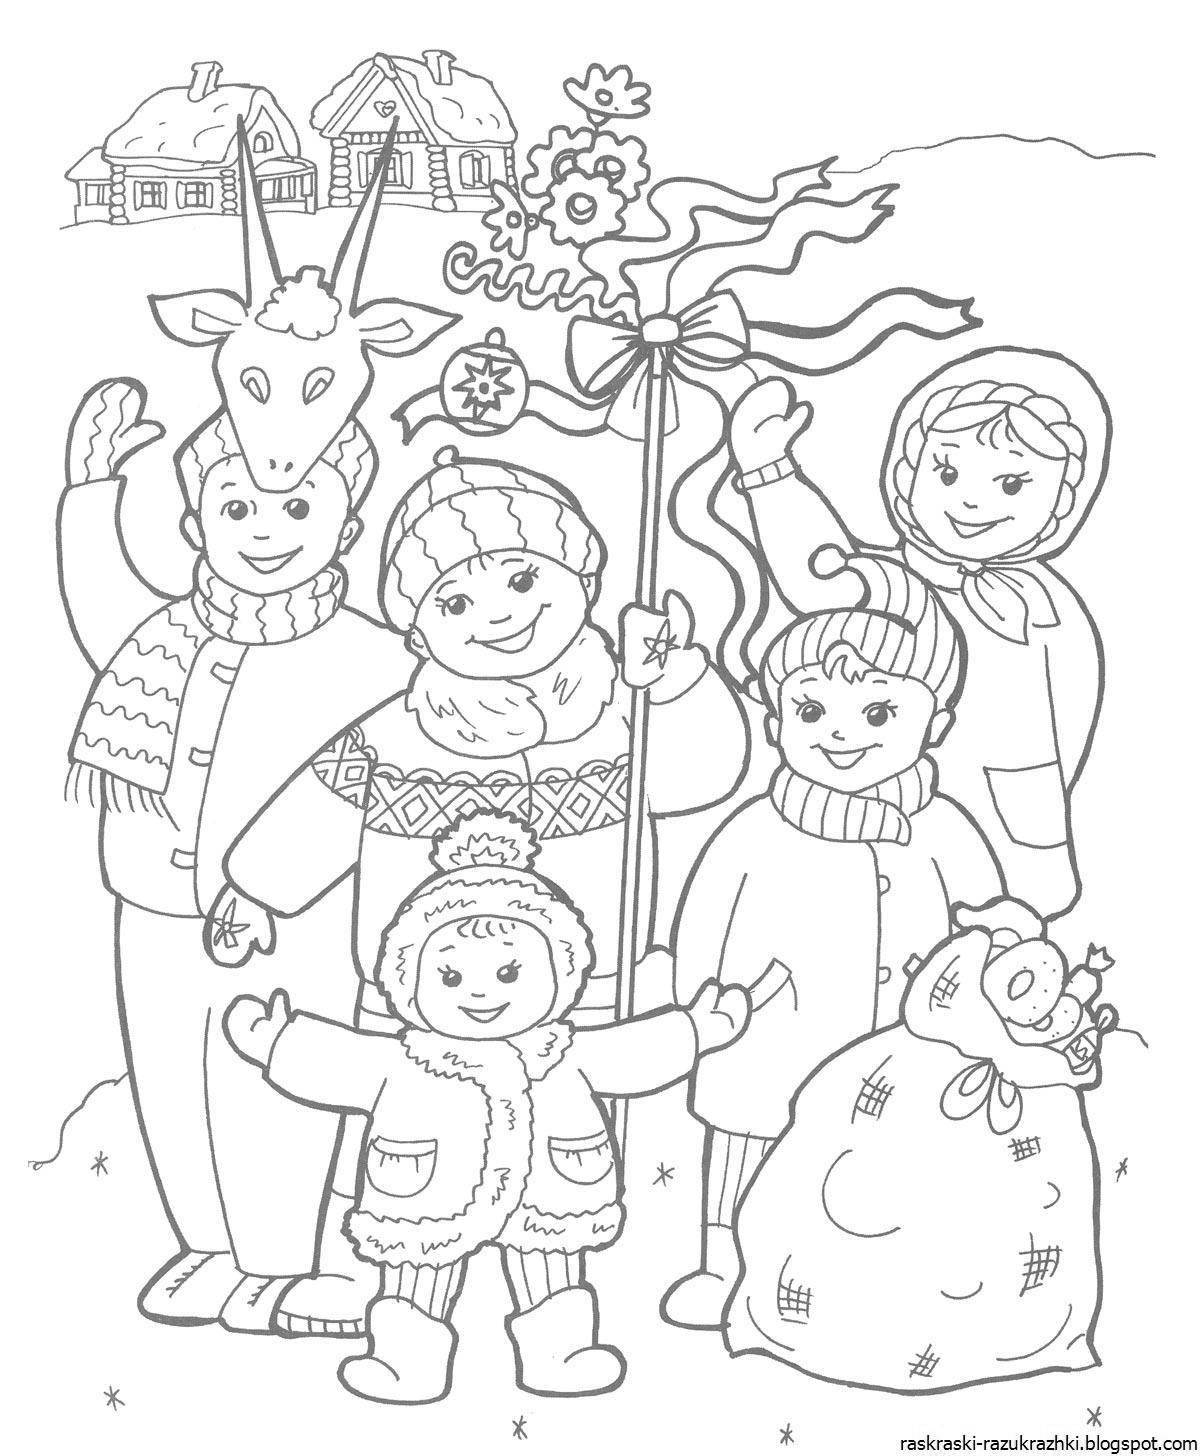 Children's carol coloring pages